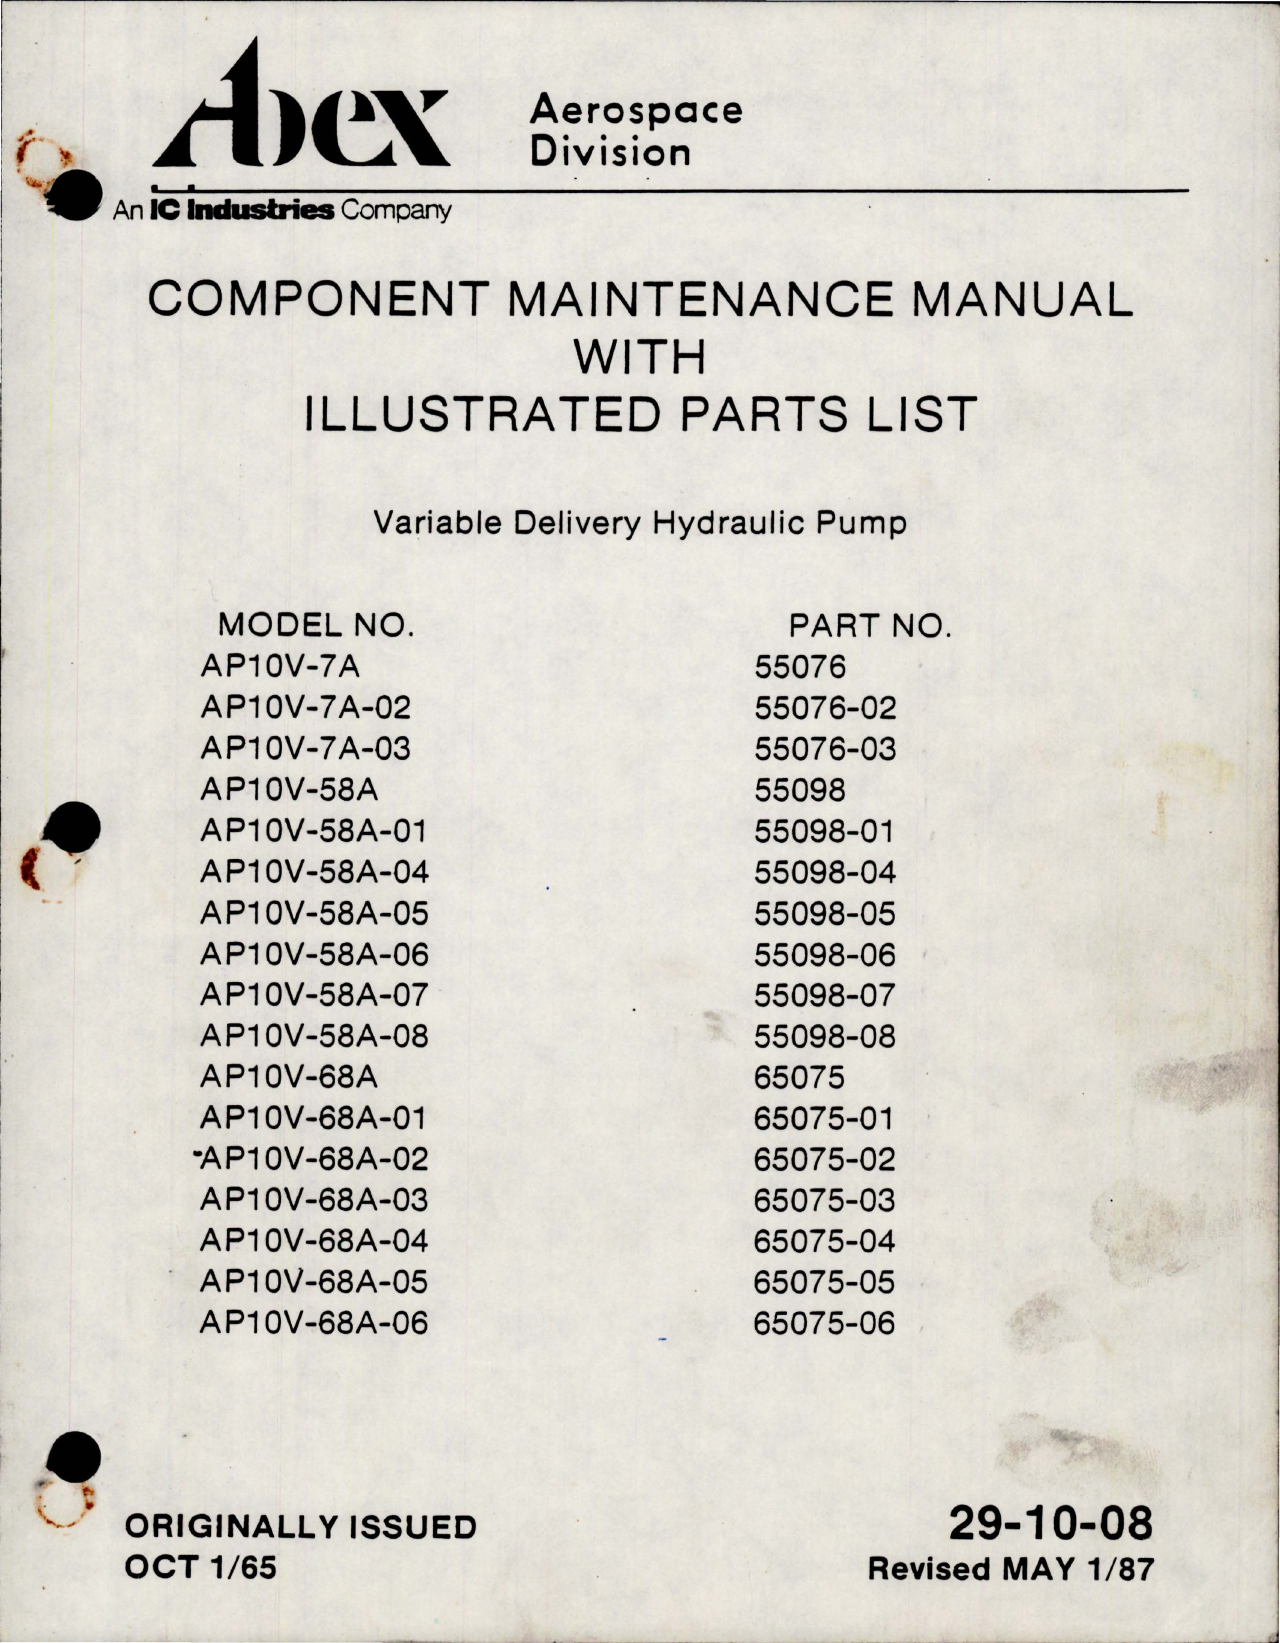 Sample page 1 from AirCorps Library document: Maintenance Manual with Illustrated Parts List for Variable Delivery Hydraulic Pump - Parts 55076, 55098, and 65075 Series